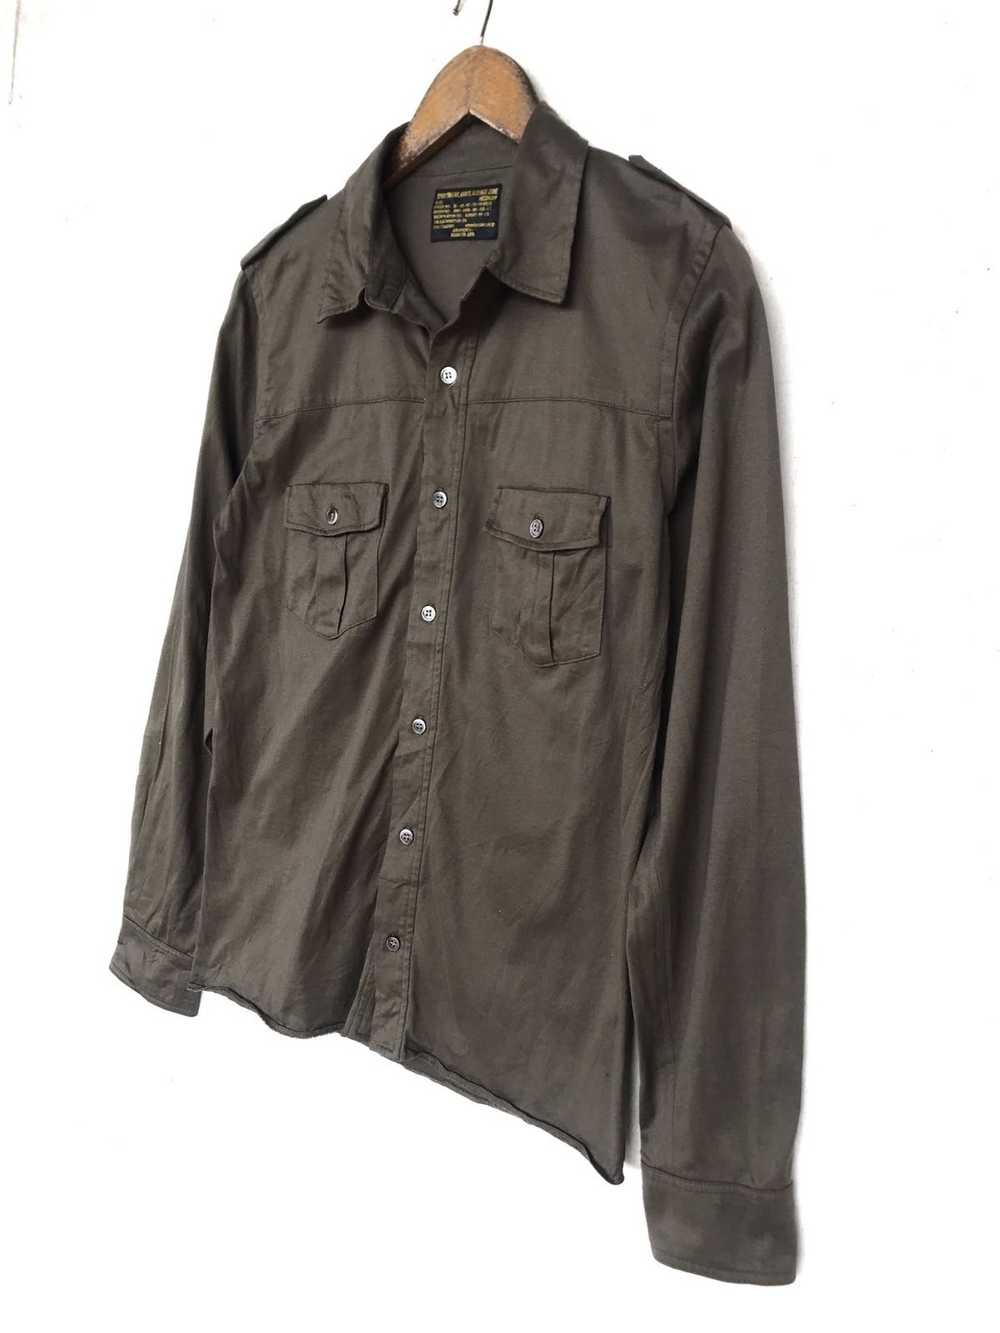 Beams Plus Button ups with Double Pockets shirt. - image 4